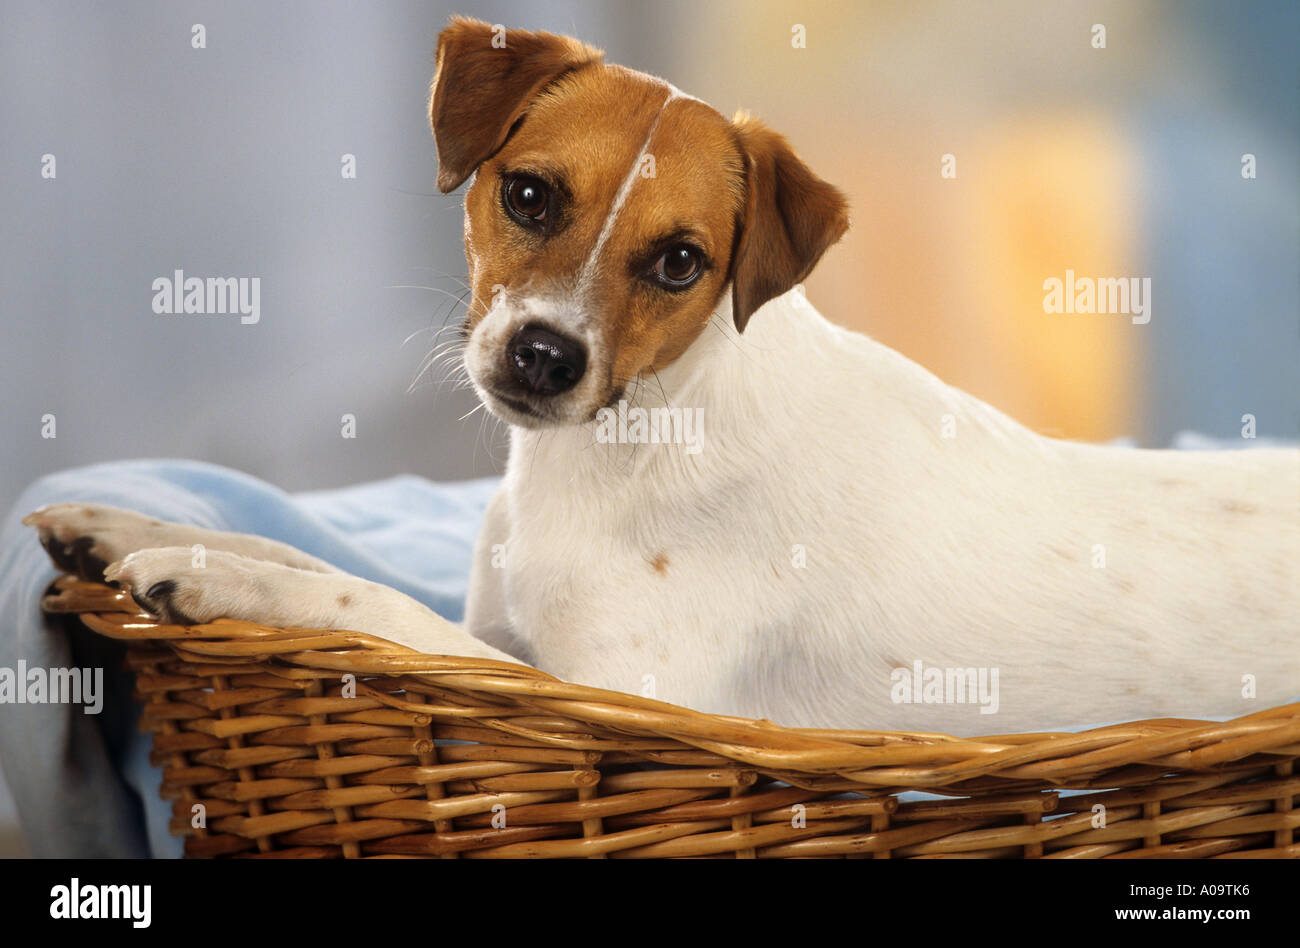 Parson Jack Russell Terrier lying in basket Stock Photo